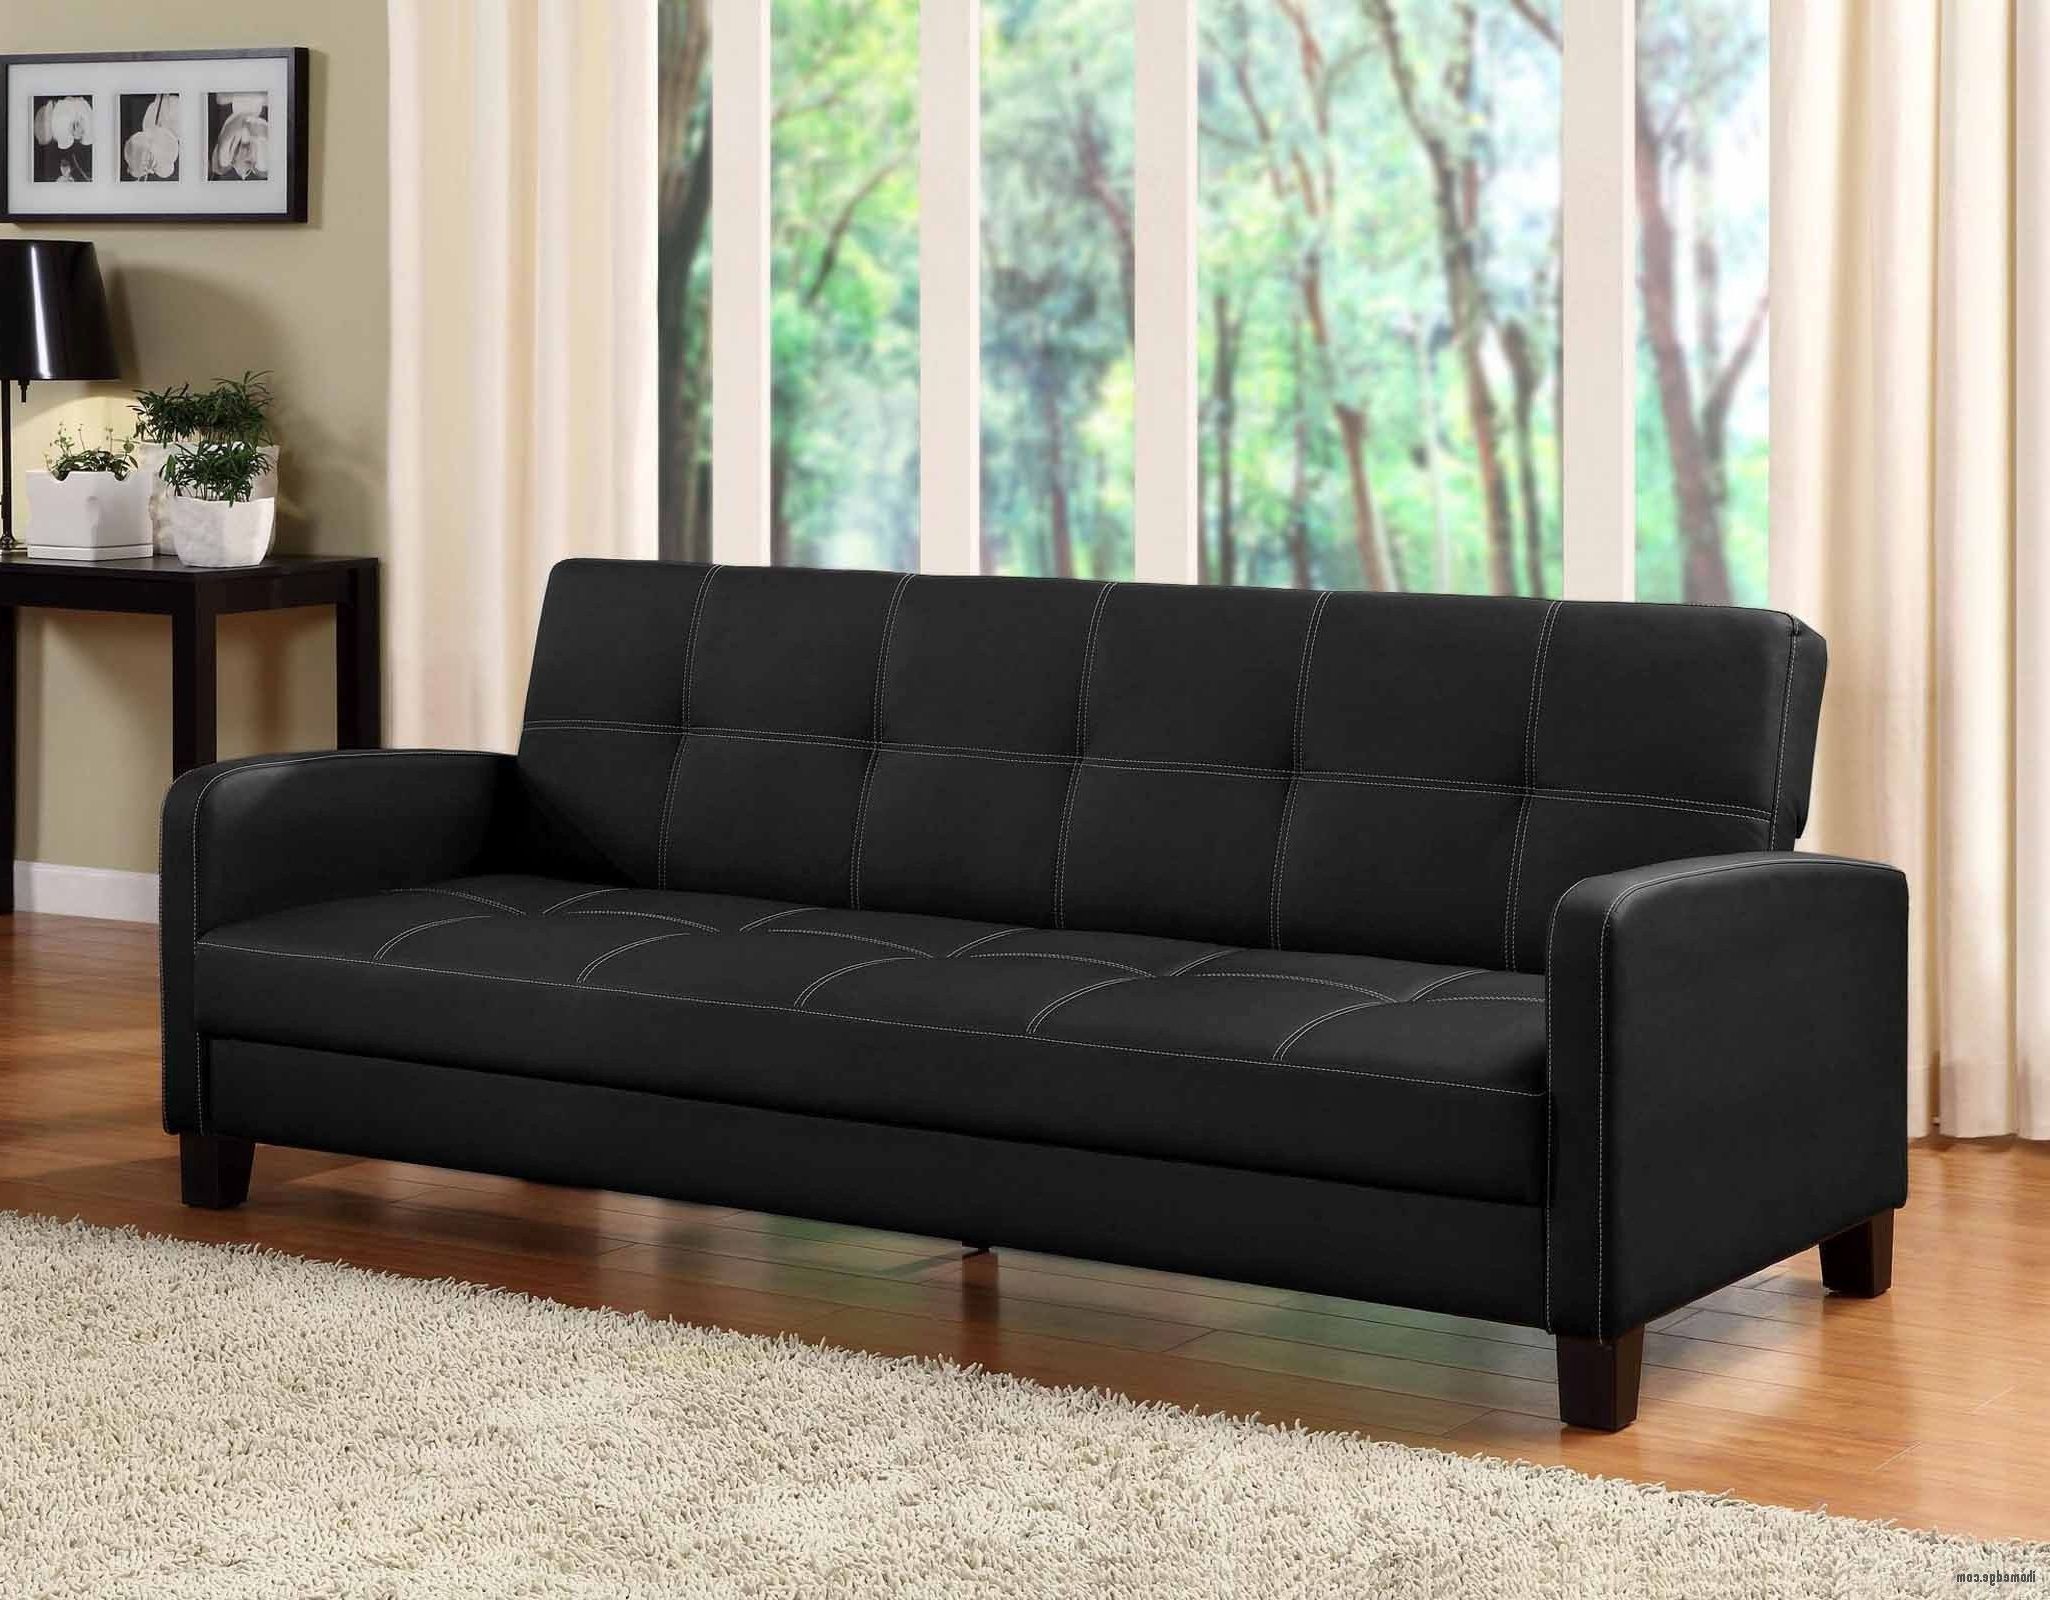 Most Popular Queen Size Convertible Sofa Bed – Ideas On Foter Inside Queen Size Convertible Sofa Beds (Photo 6 of 15)